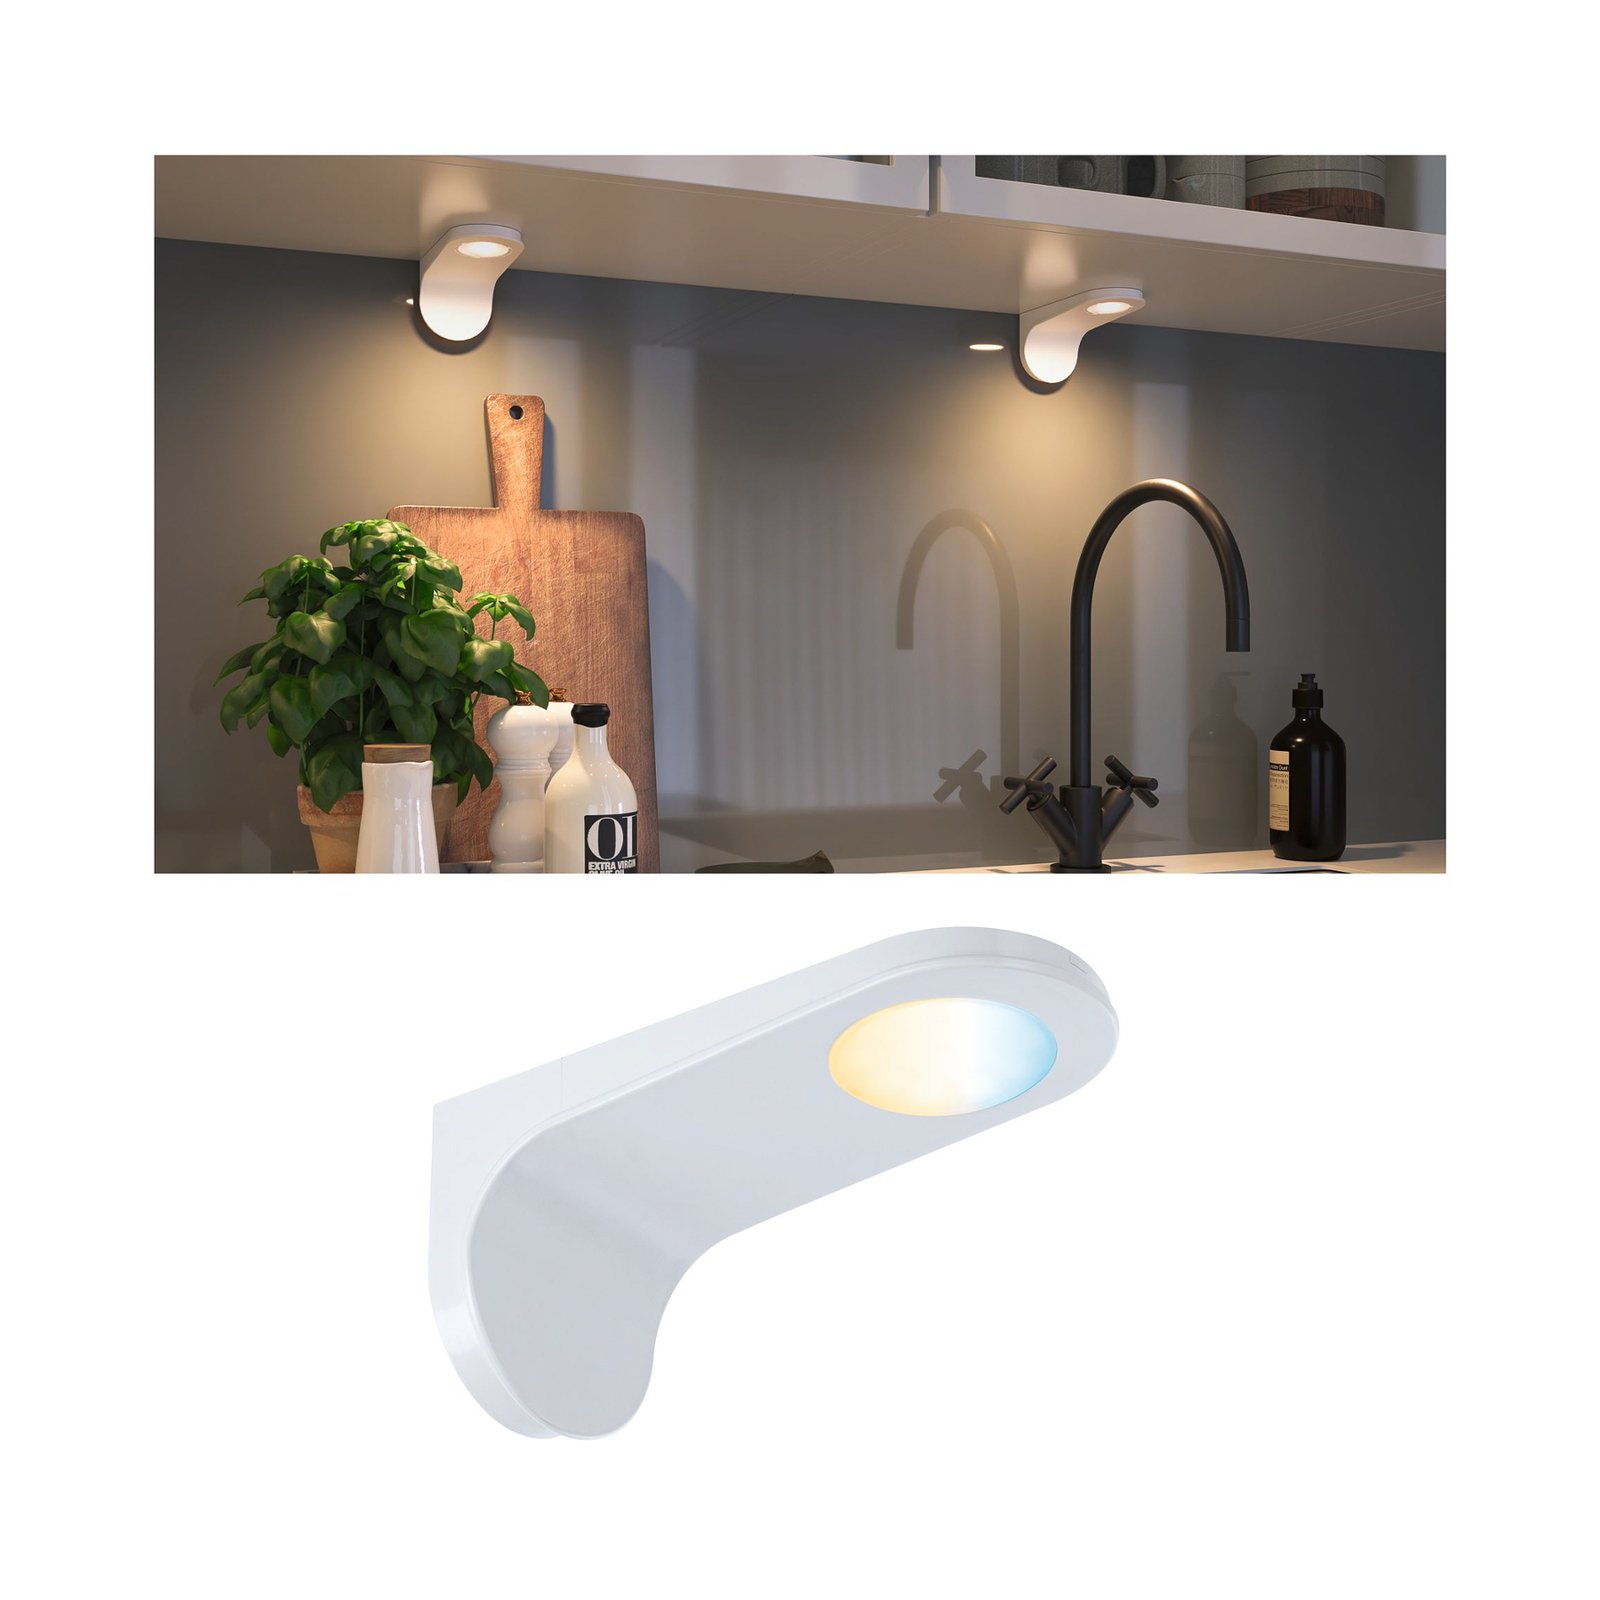 Paulmann Clever Connect Neda lampe meuble, blanche